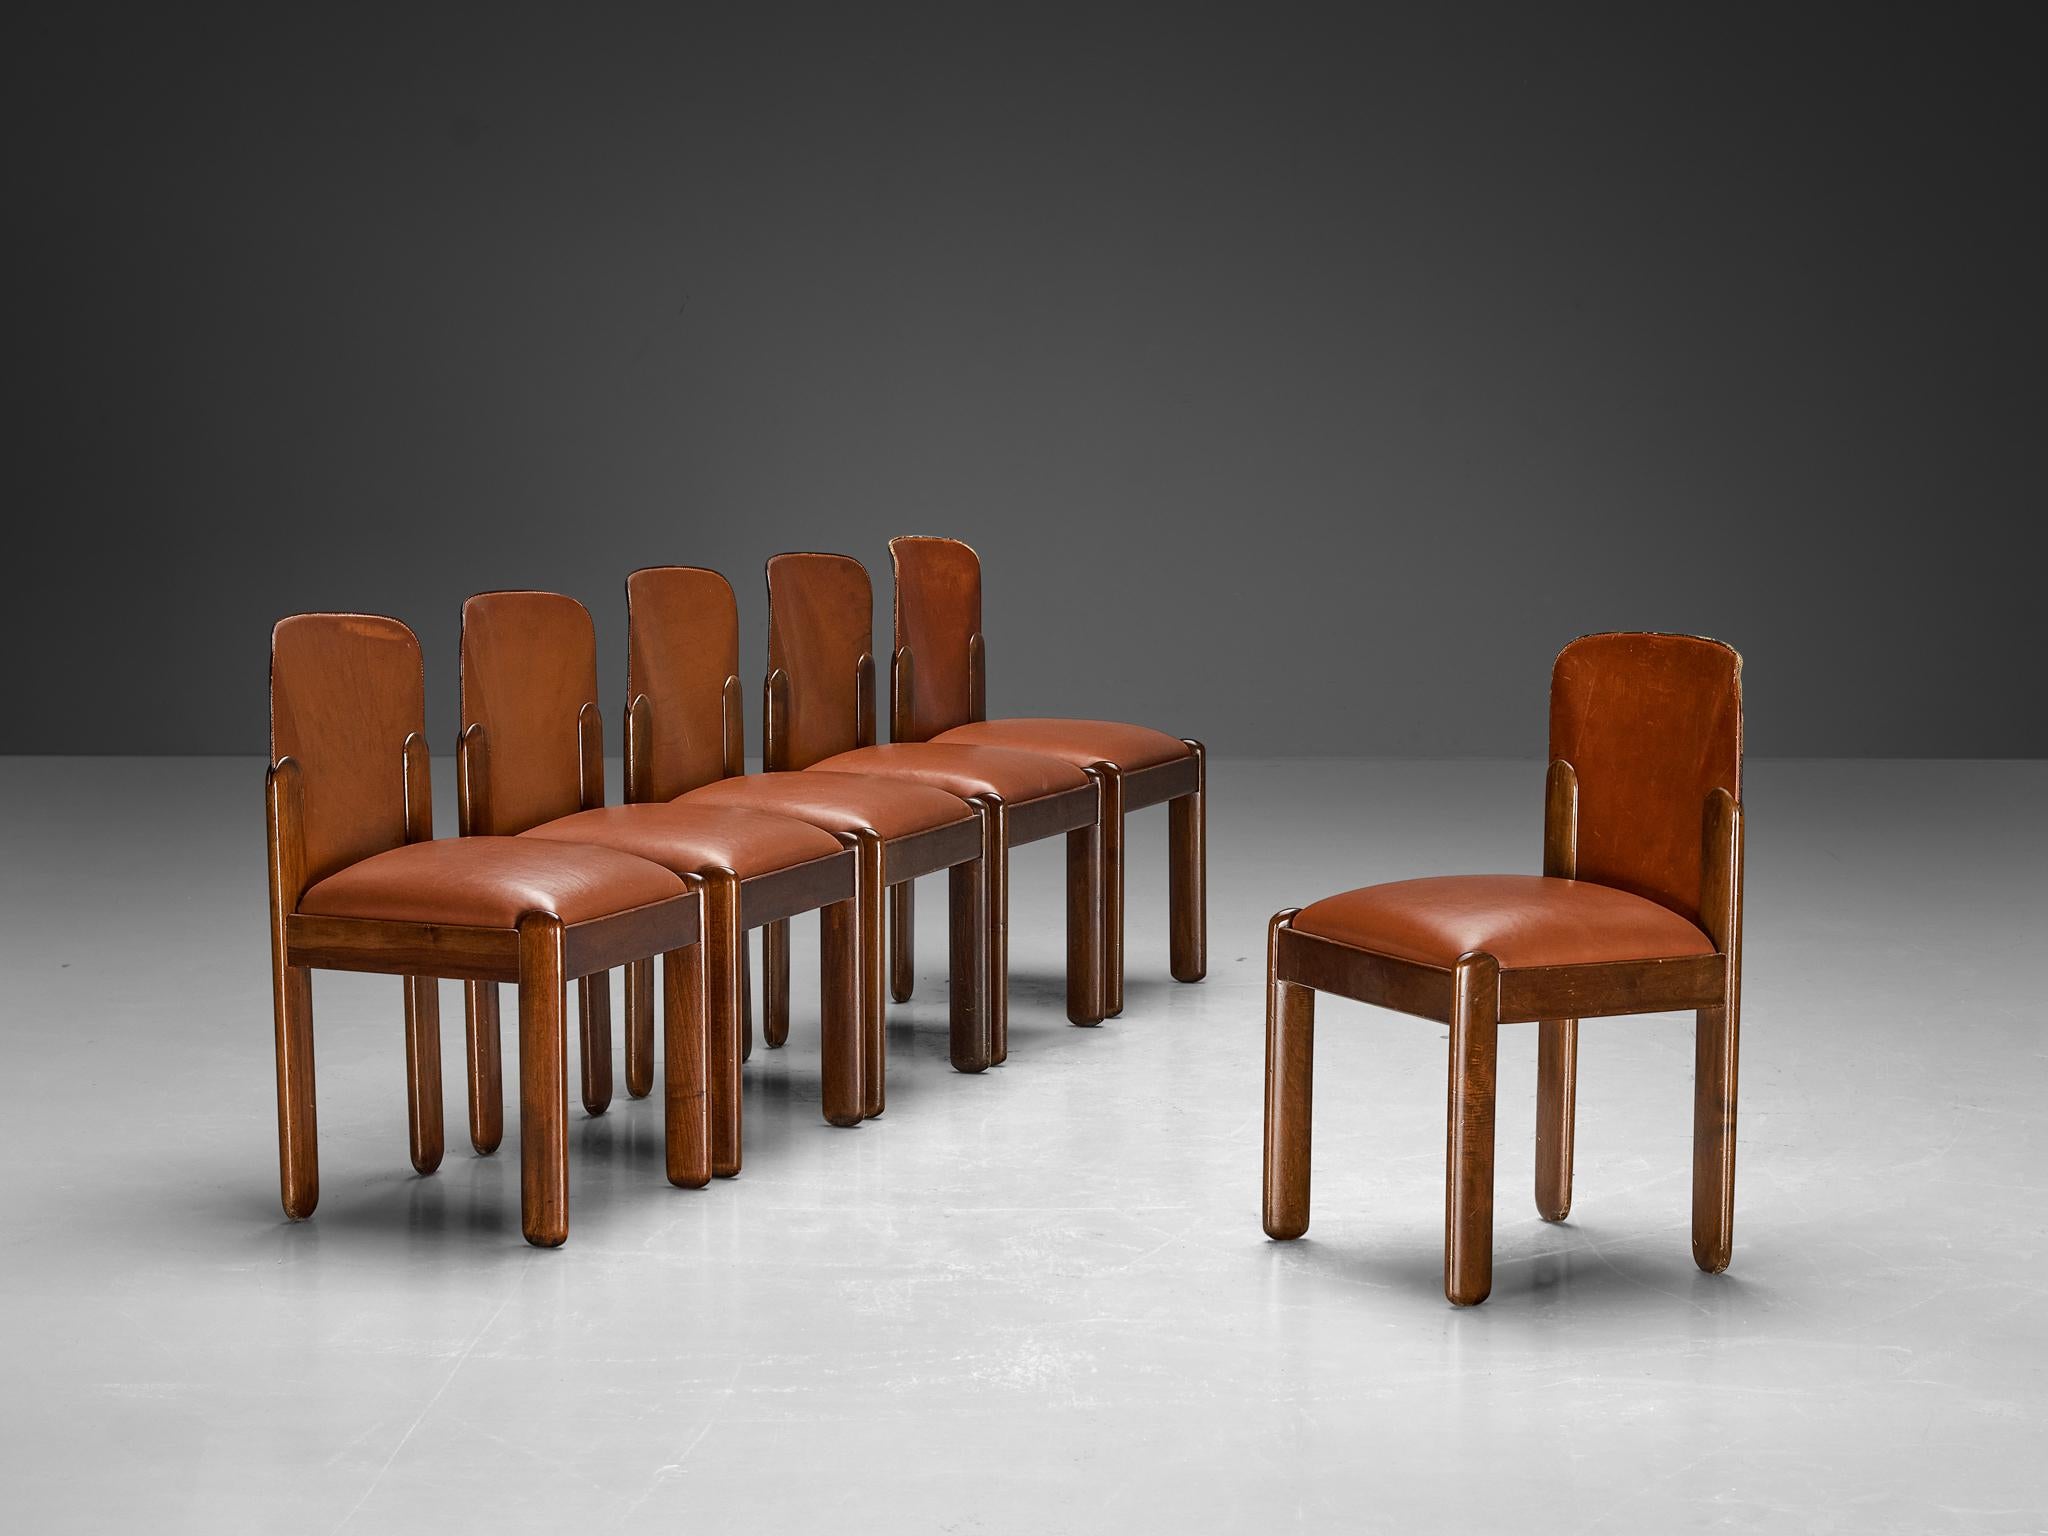 Silvio Coppola for Bernini, set of six dining chairs, model '330', red brown faux leather, walnut, Italy, 1969

Wonderful set of dining chairs in brown with a red hue leatherette and walnut wood by Italian designer Silvio Coppola. These